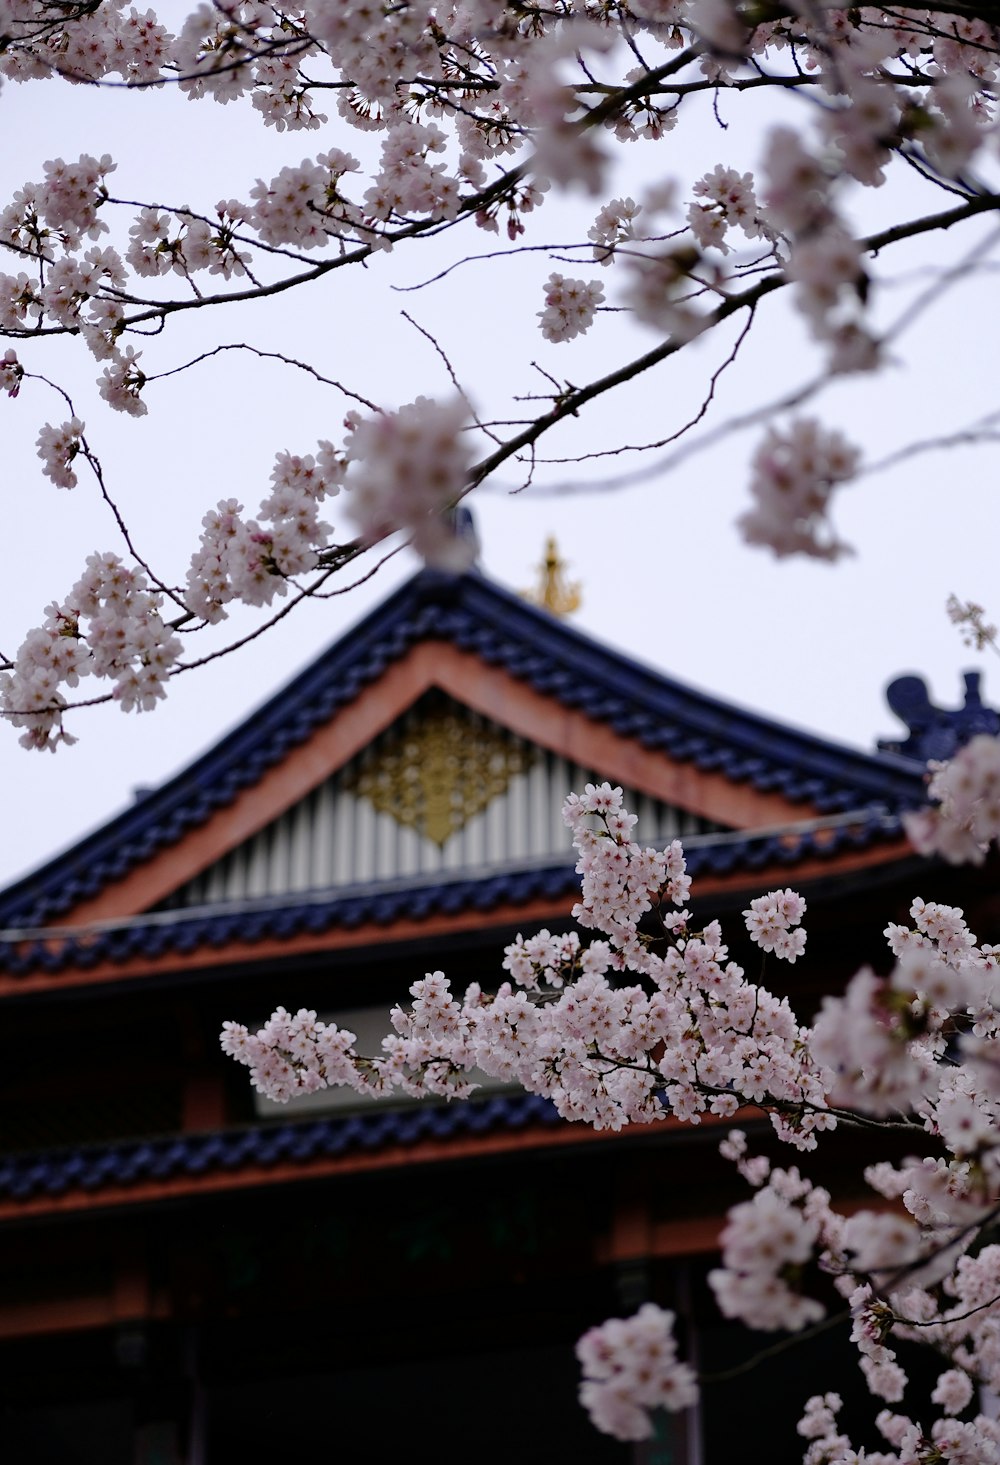 a building with a blue roof and a tree with white flowers